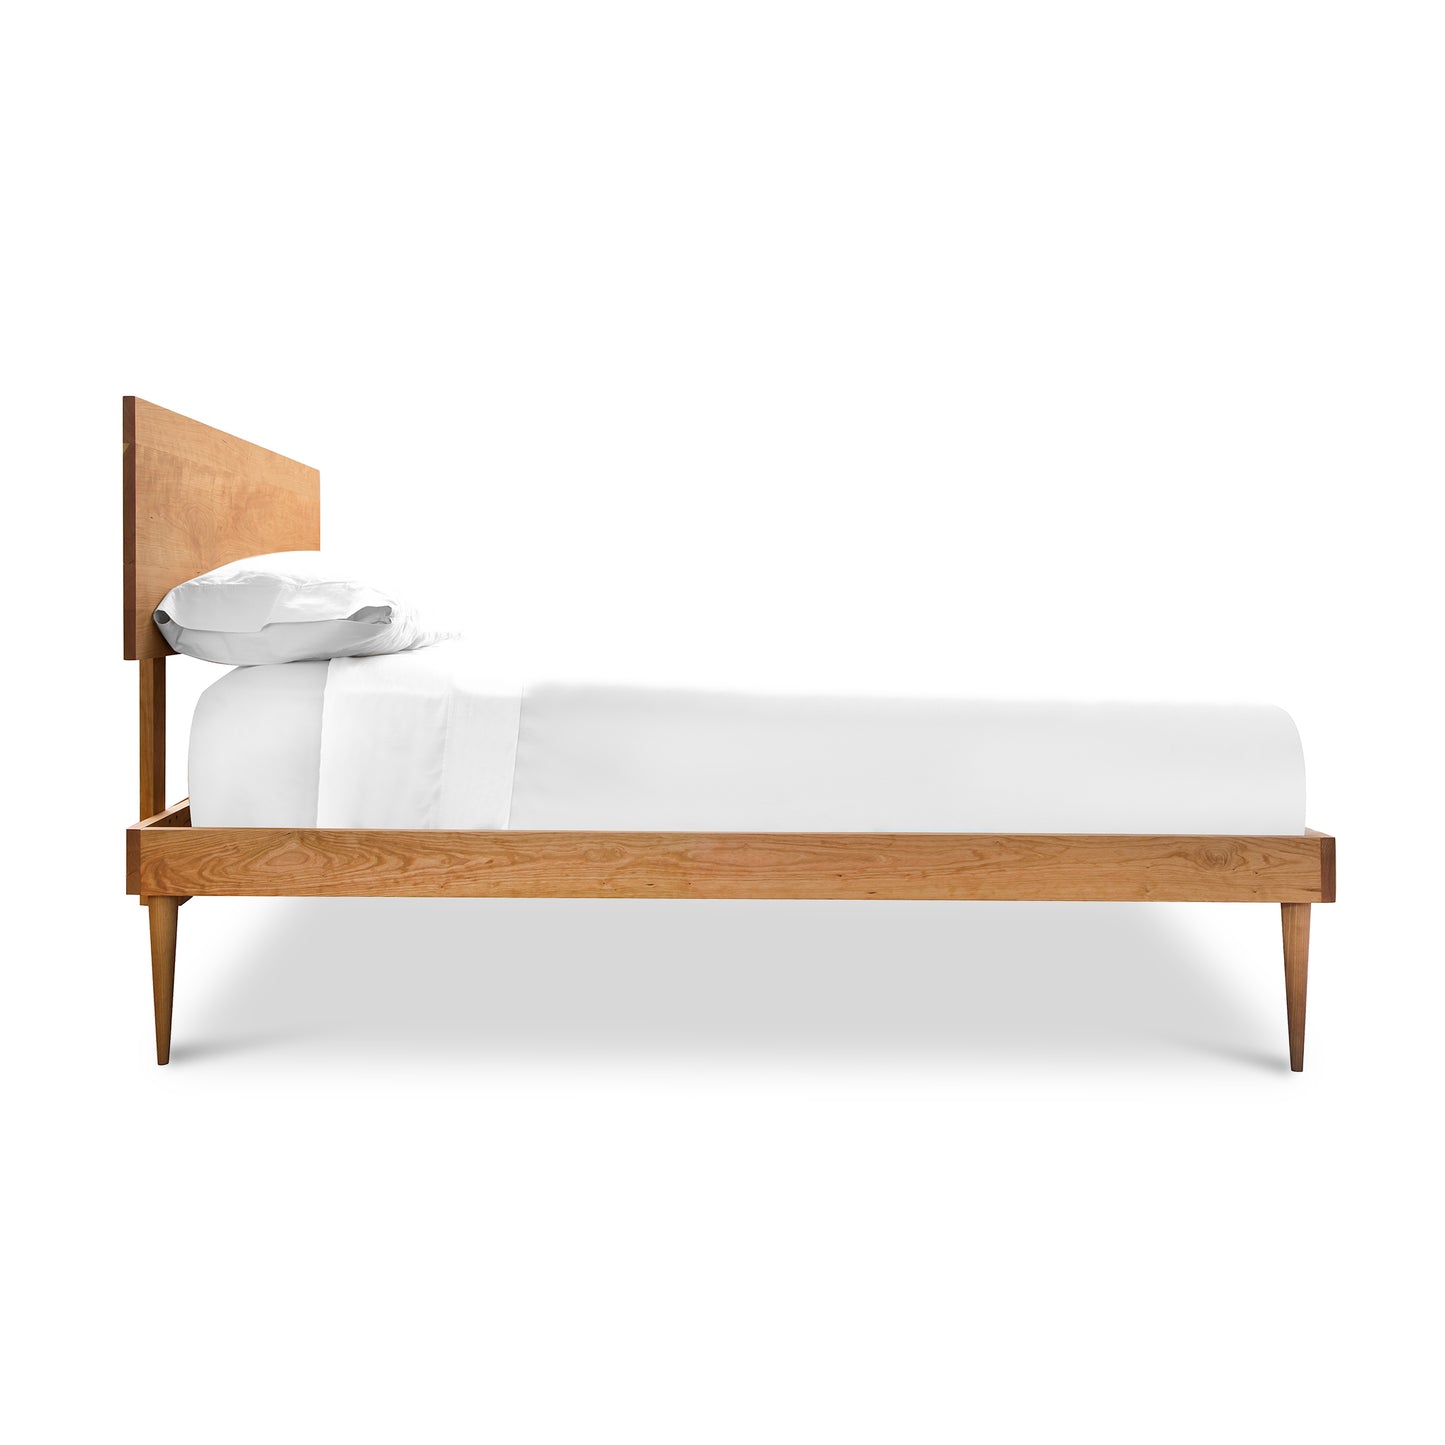 A Vermont Furniture Designs Larssen Bed with a white mattress and pillows, isolated on a white background.